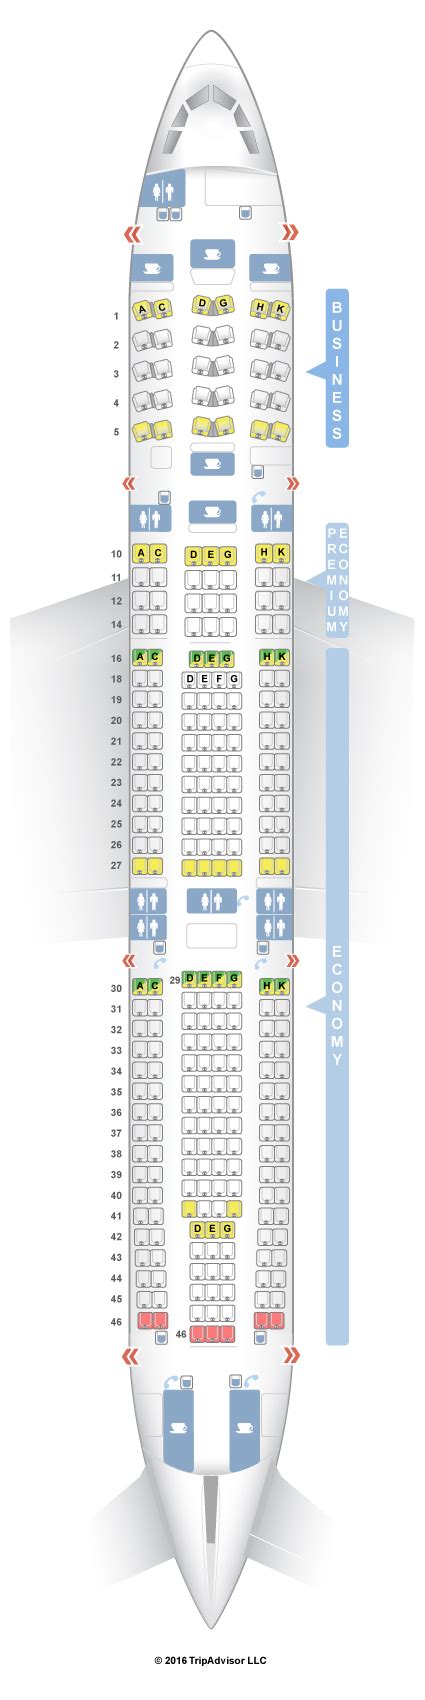 Airbus A340 300 Seat Chart